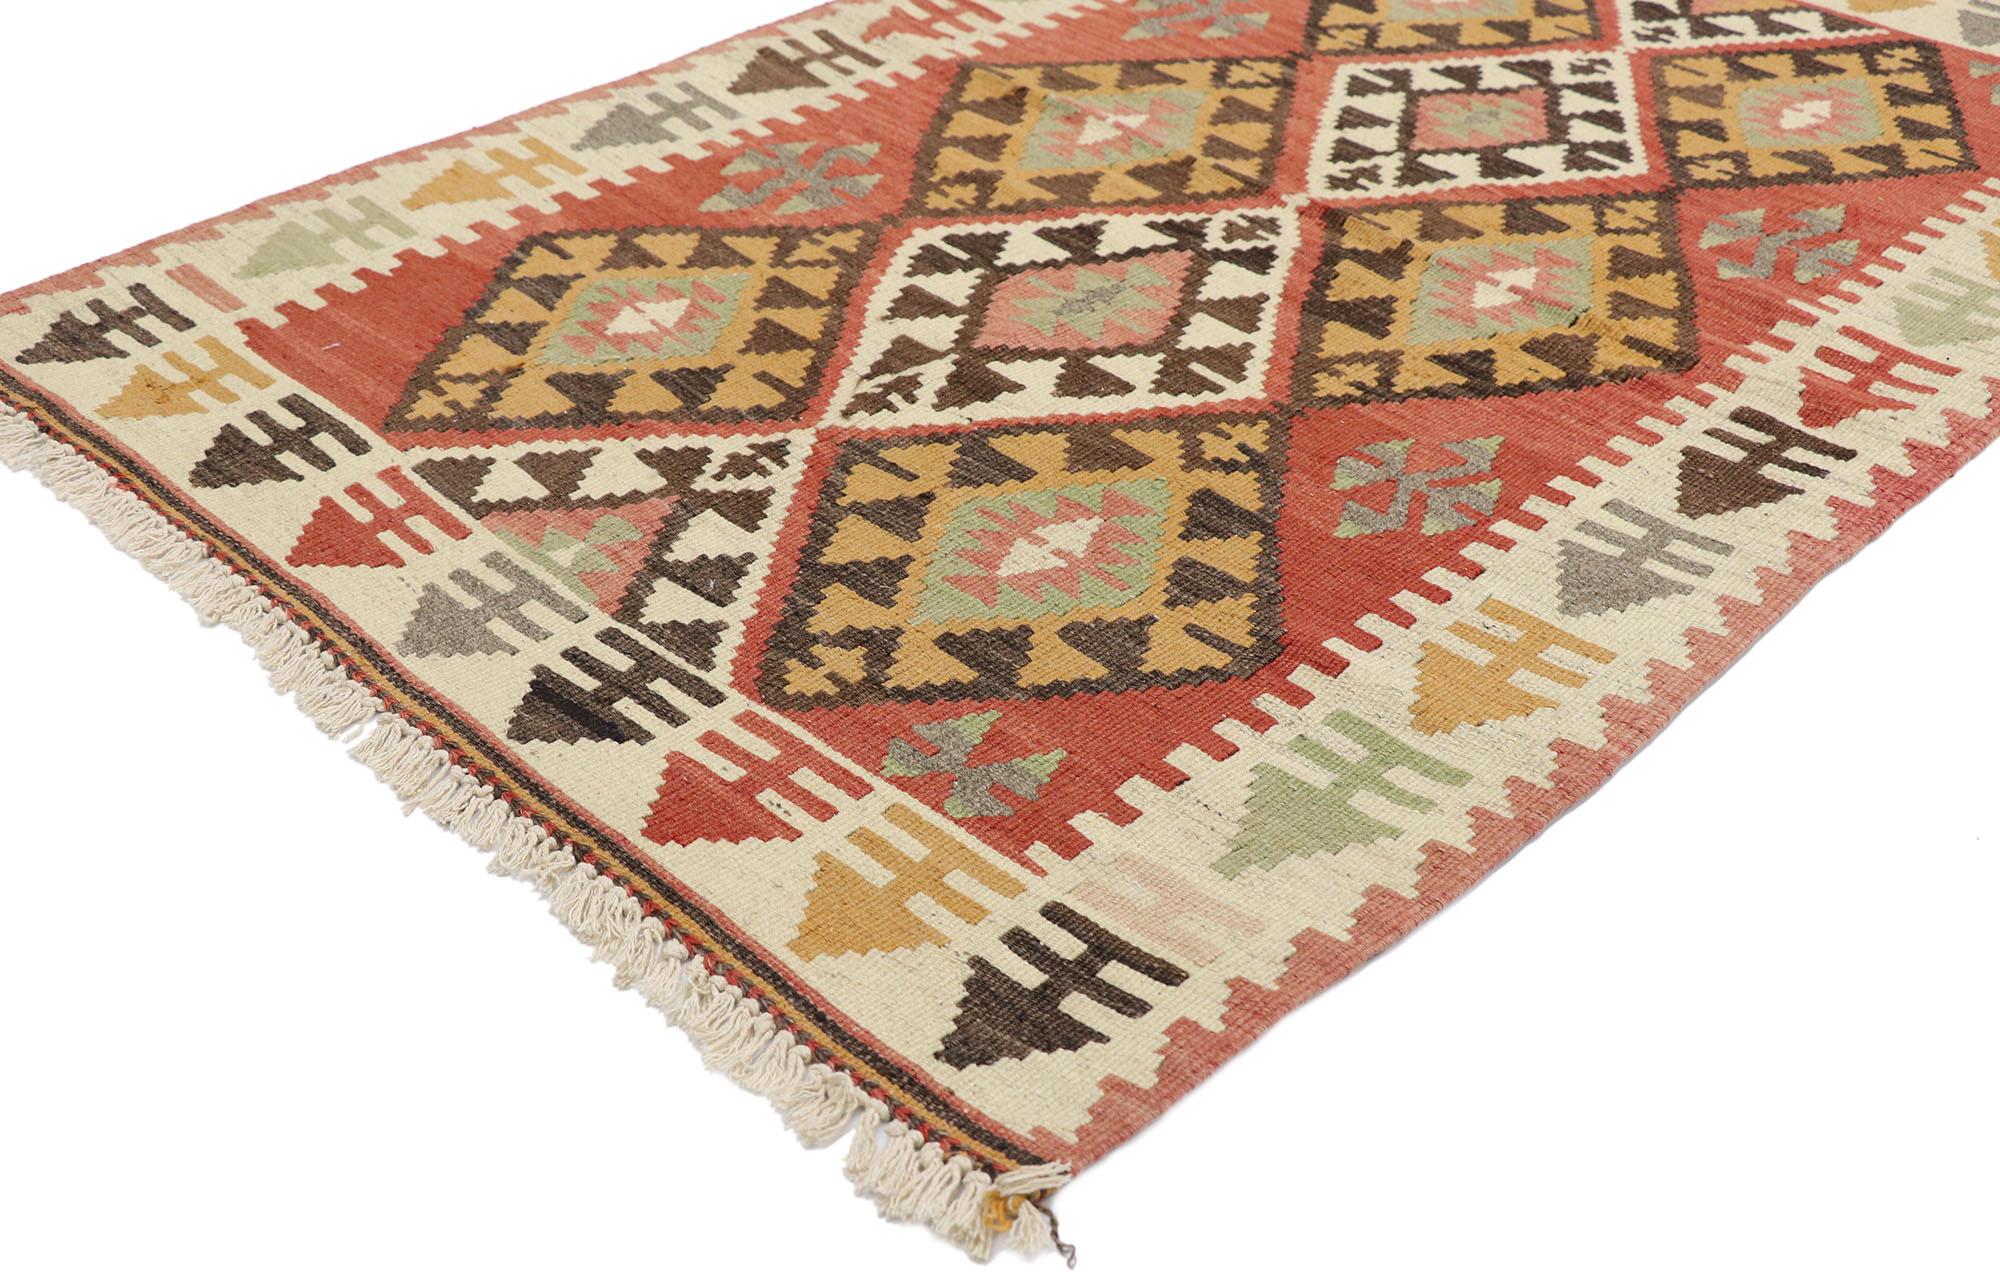 77847 Vintage Persian Shiraz Kilim rug with Southwestern Tribal Style 03'01 x 04'10. Full of tiny details and a bold expressive design combined with vibrant colors and tribal style, this hand-woven wool vintage Persian Shiraz kilim rug is a